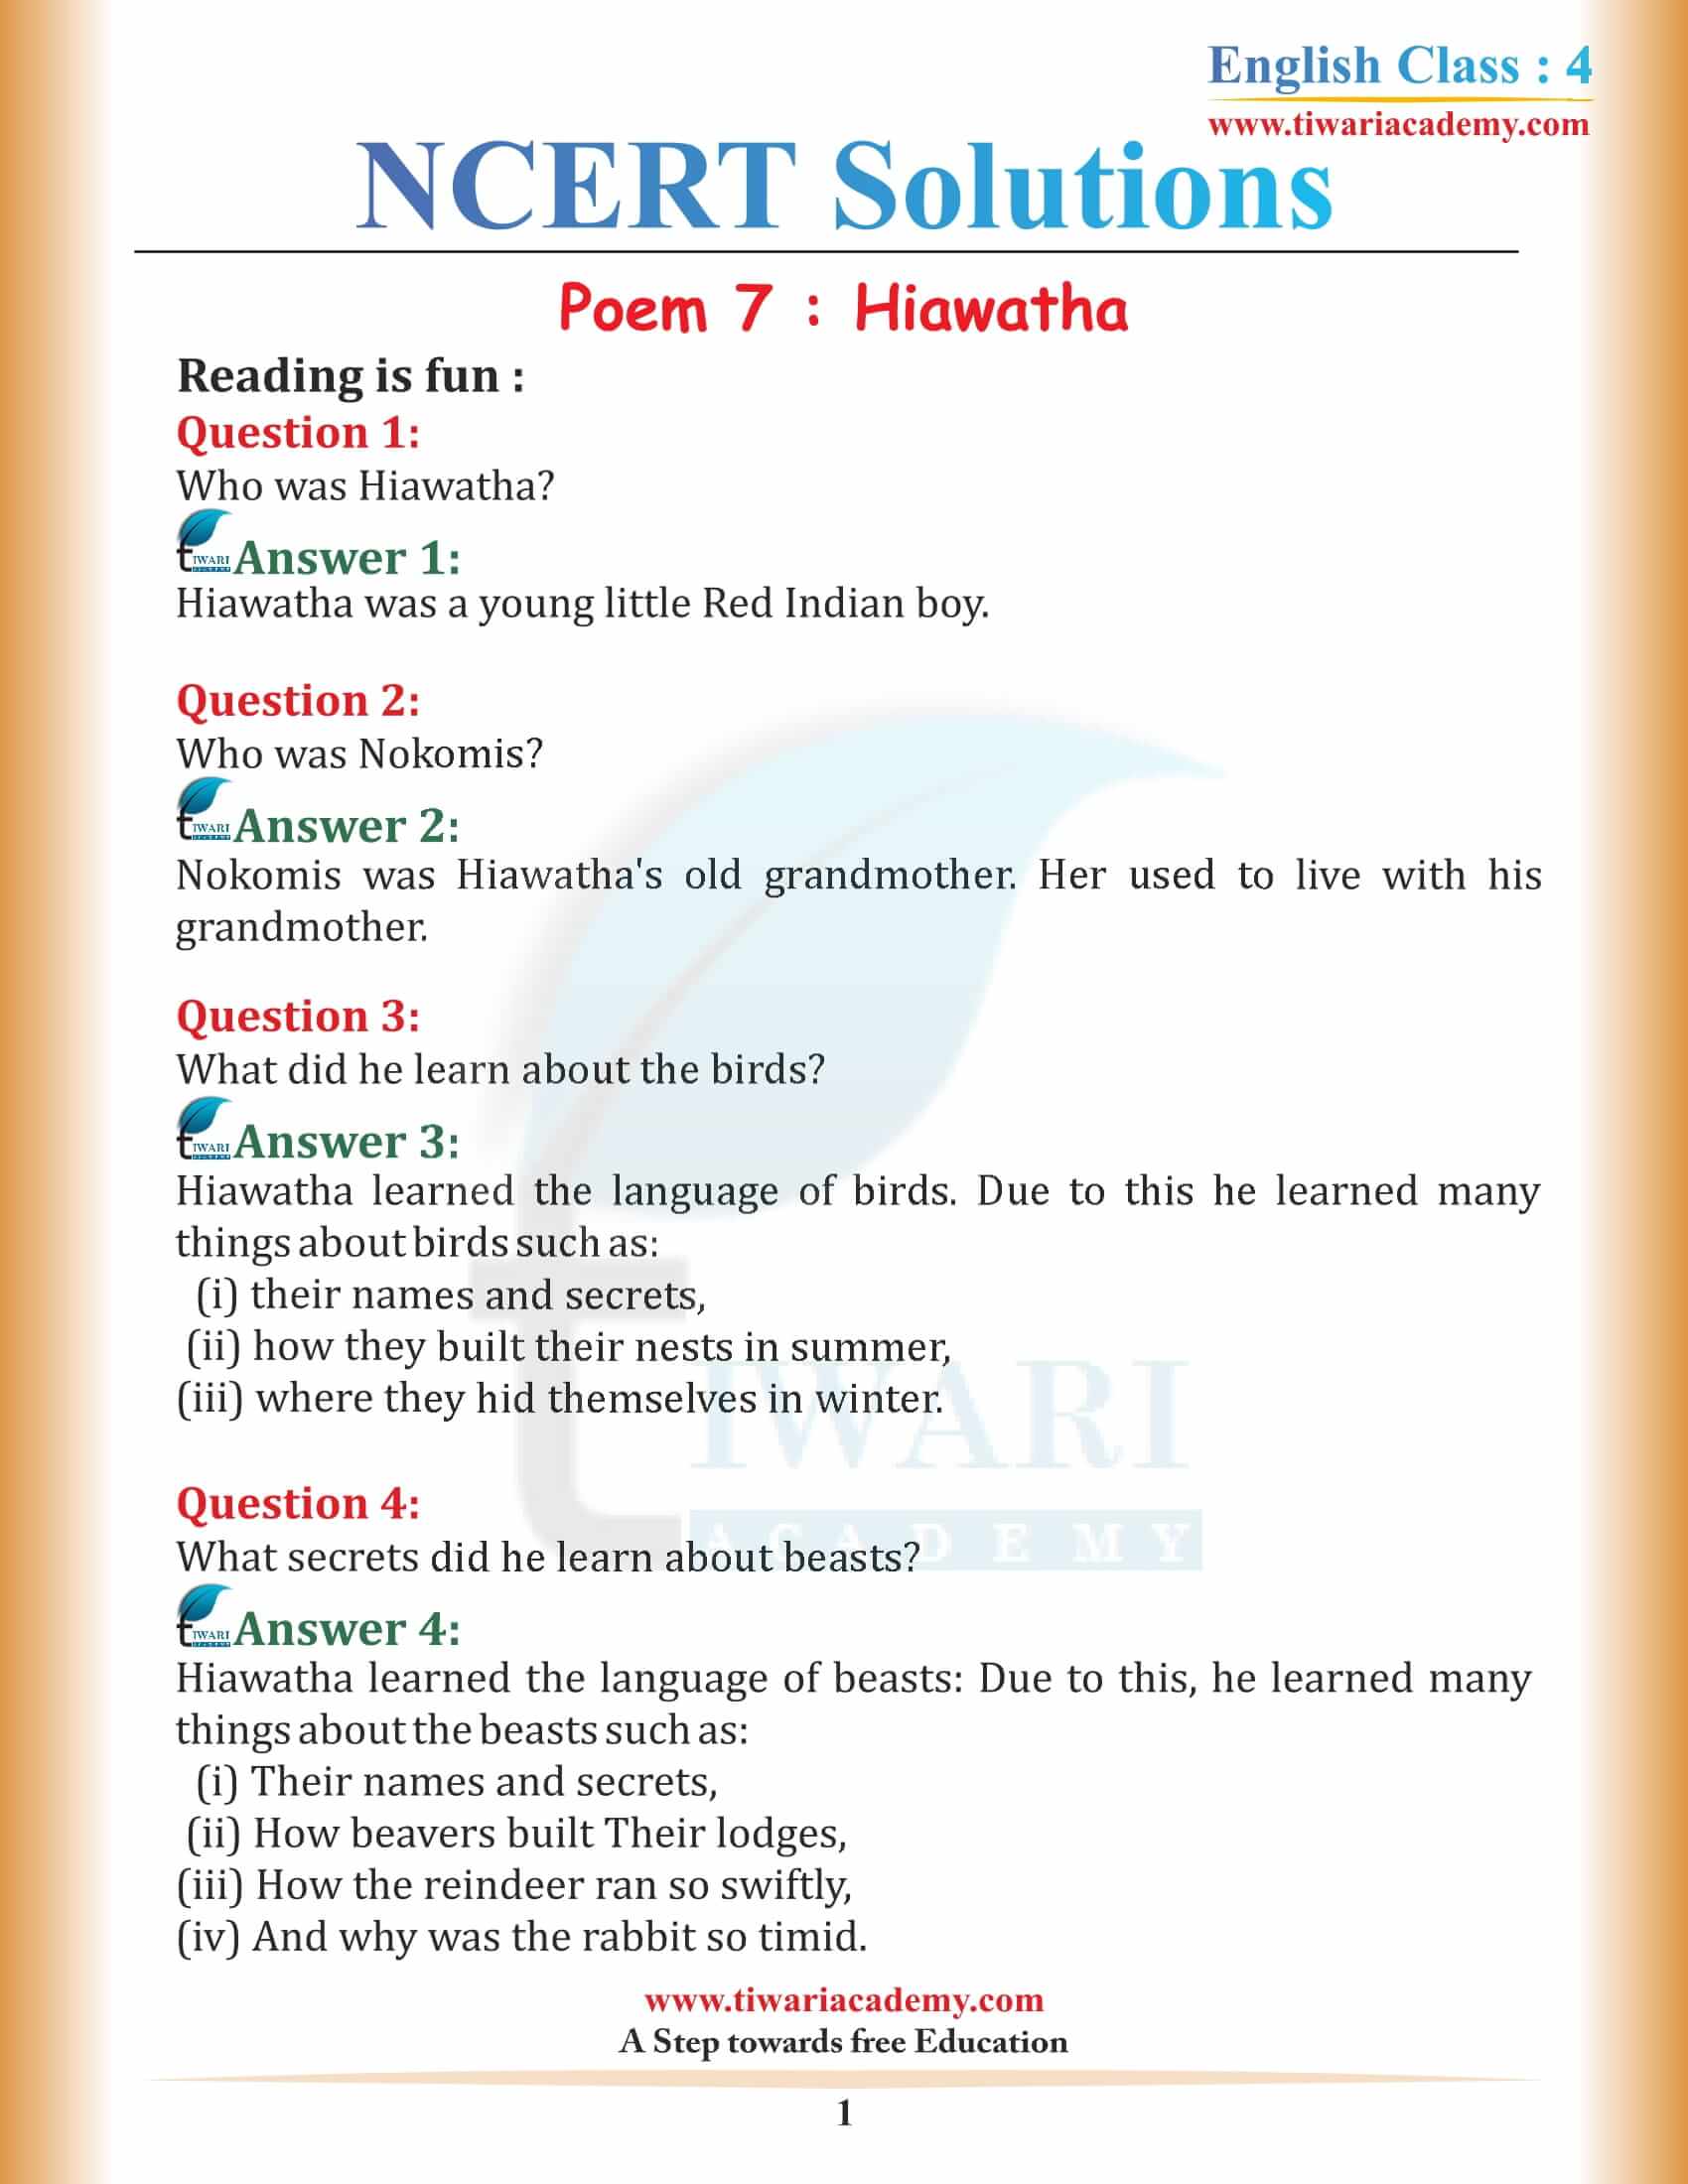 NCERT Solutions for Class 4 English Unit 7 Chapter 1 Hiawatha